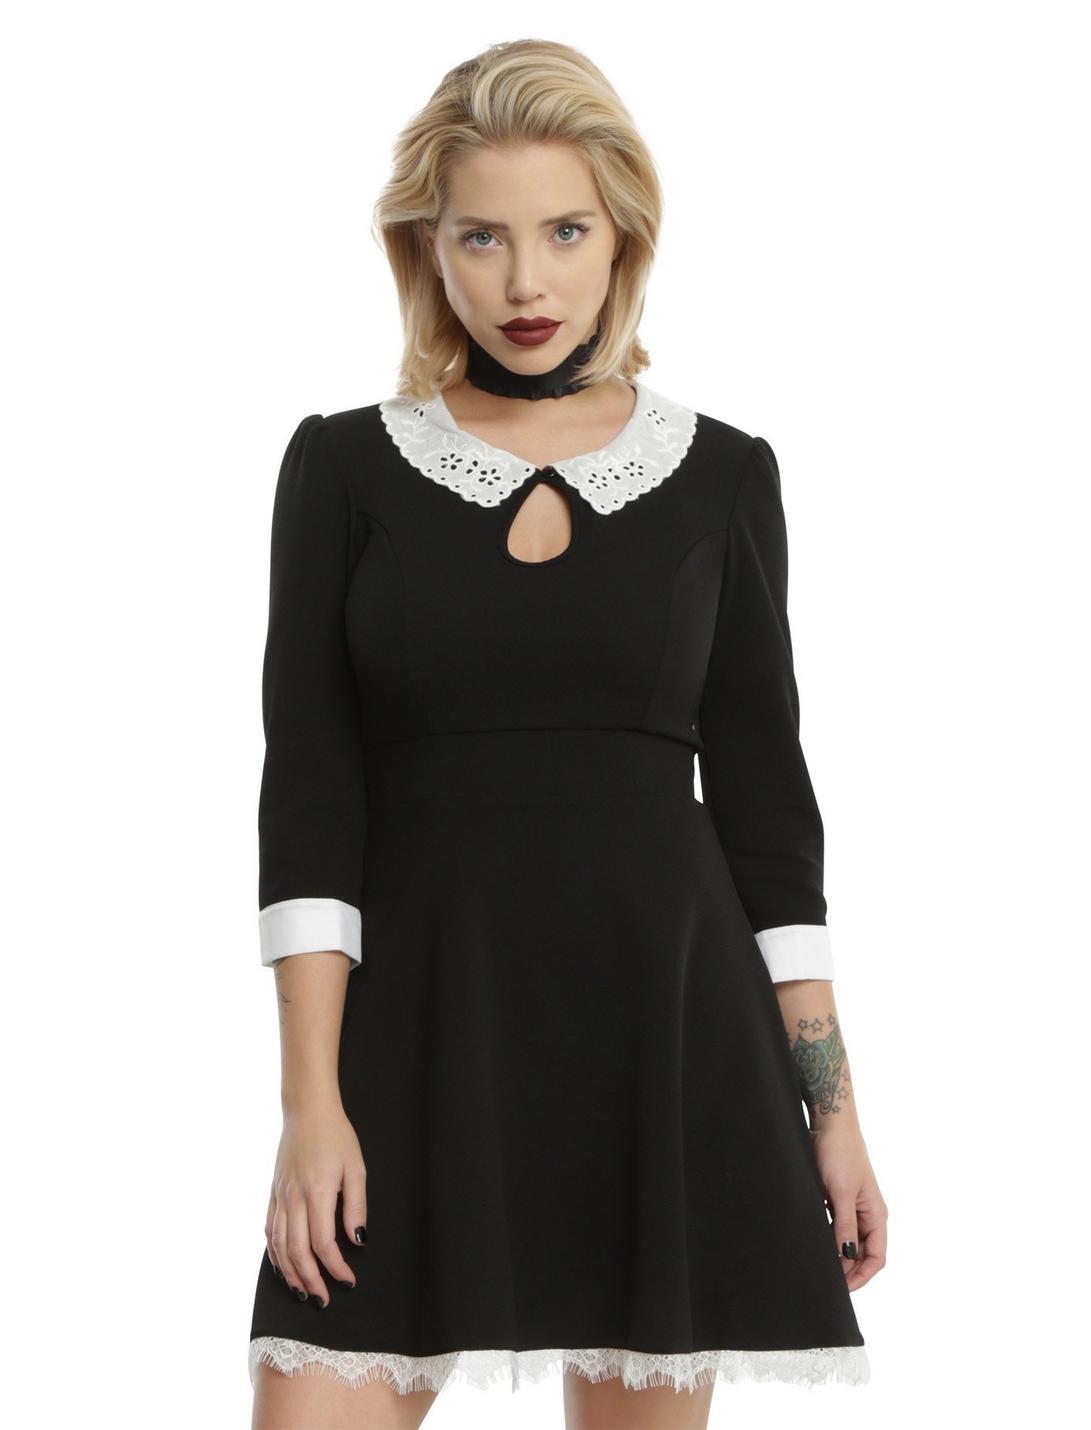 ade yayah recommends American Horror Story Maid Outfit